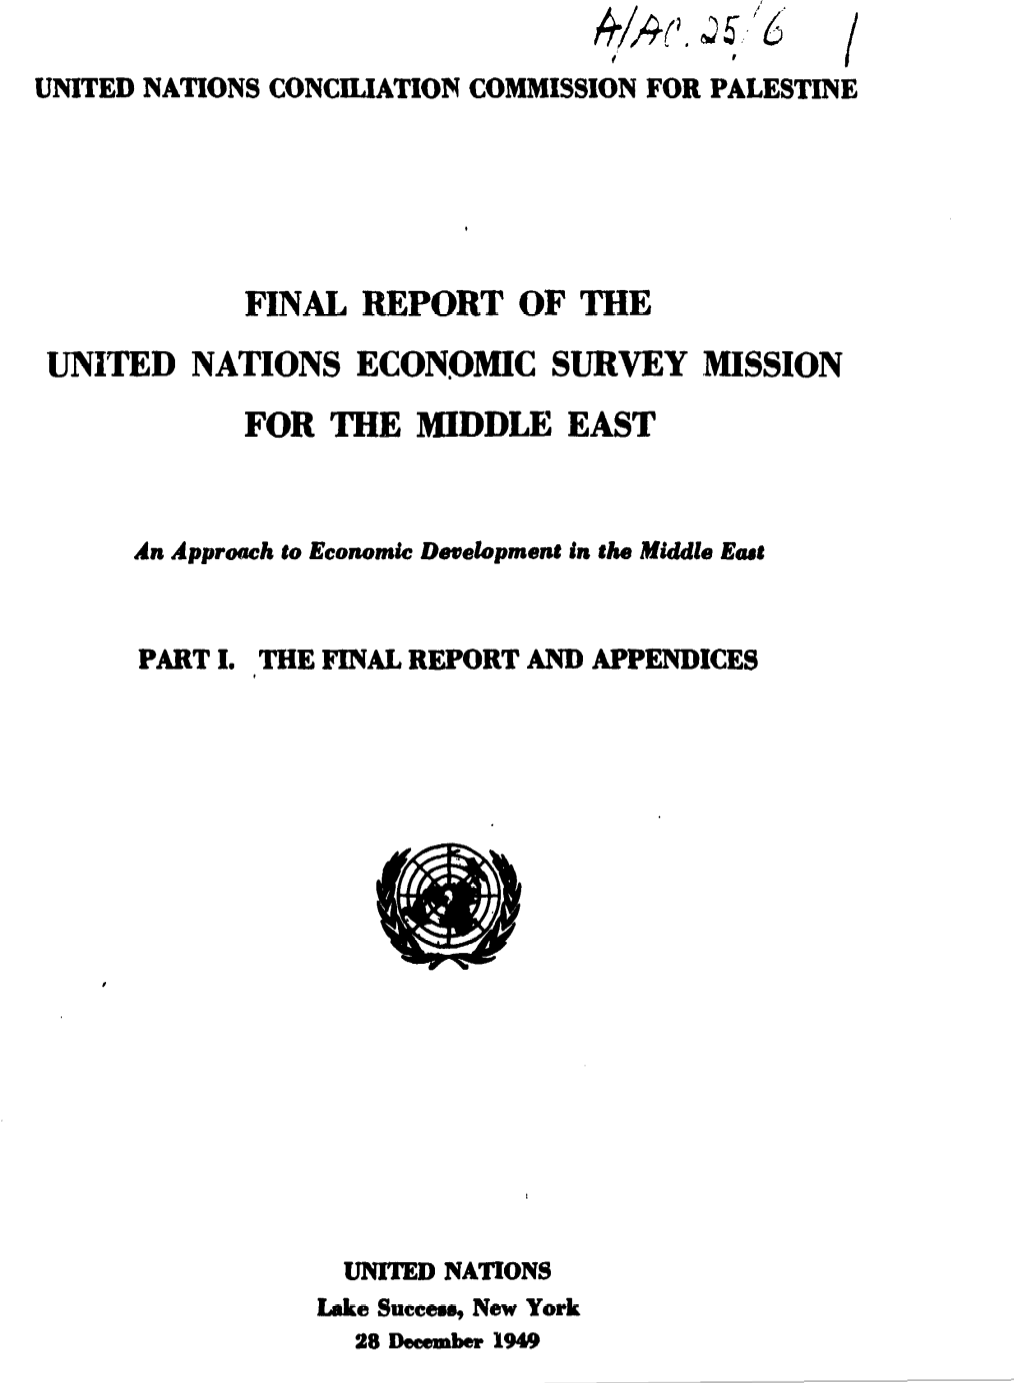 Final Report of the United Nations Econ,Omic Survey Mission for the Middle East